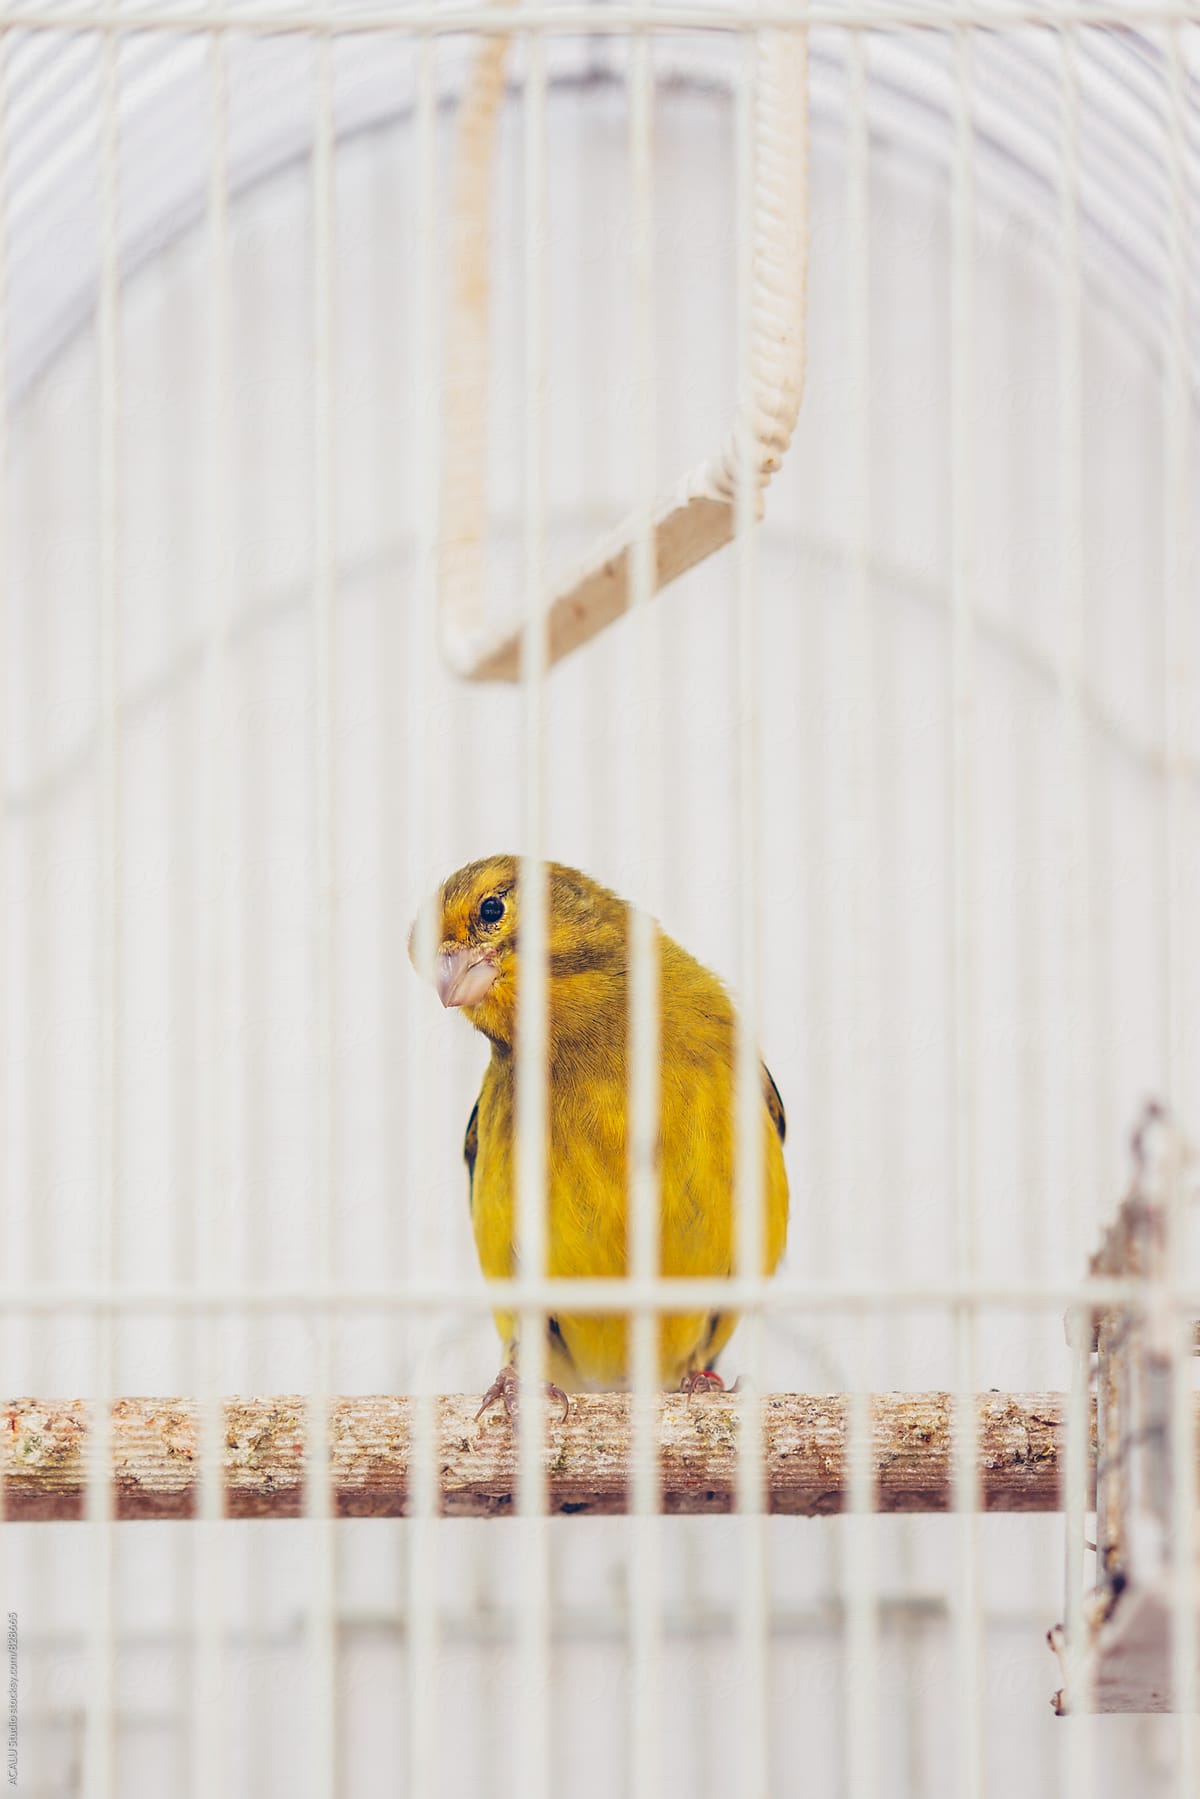 Little yellow bird in a cage